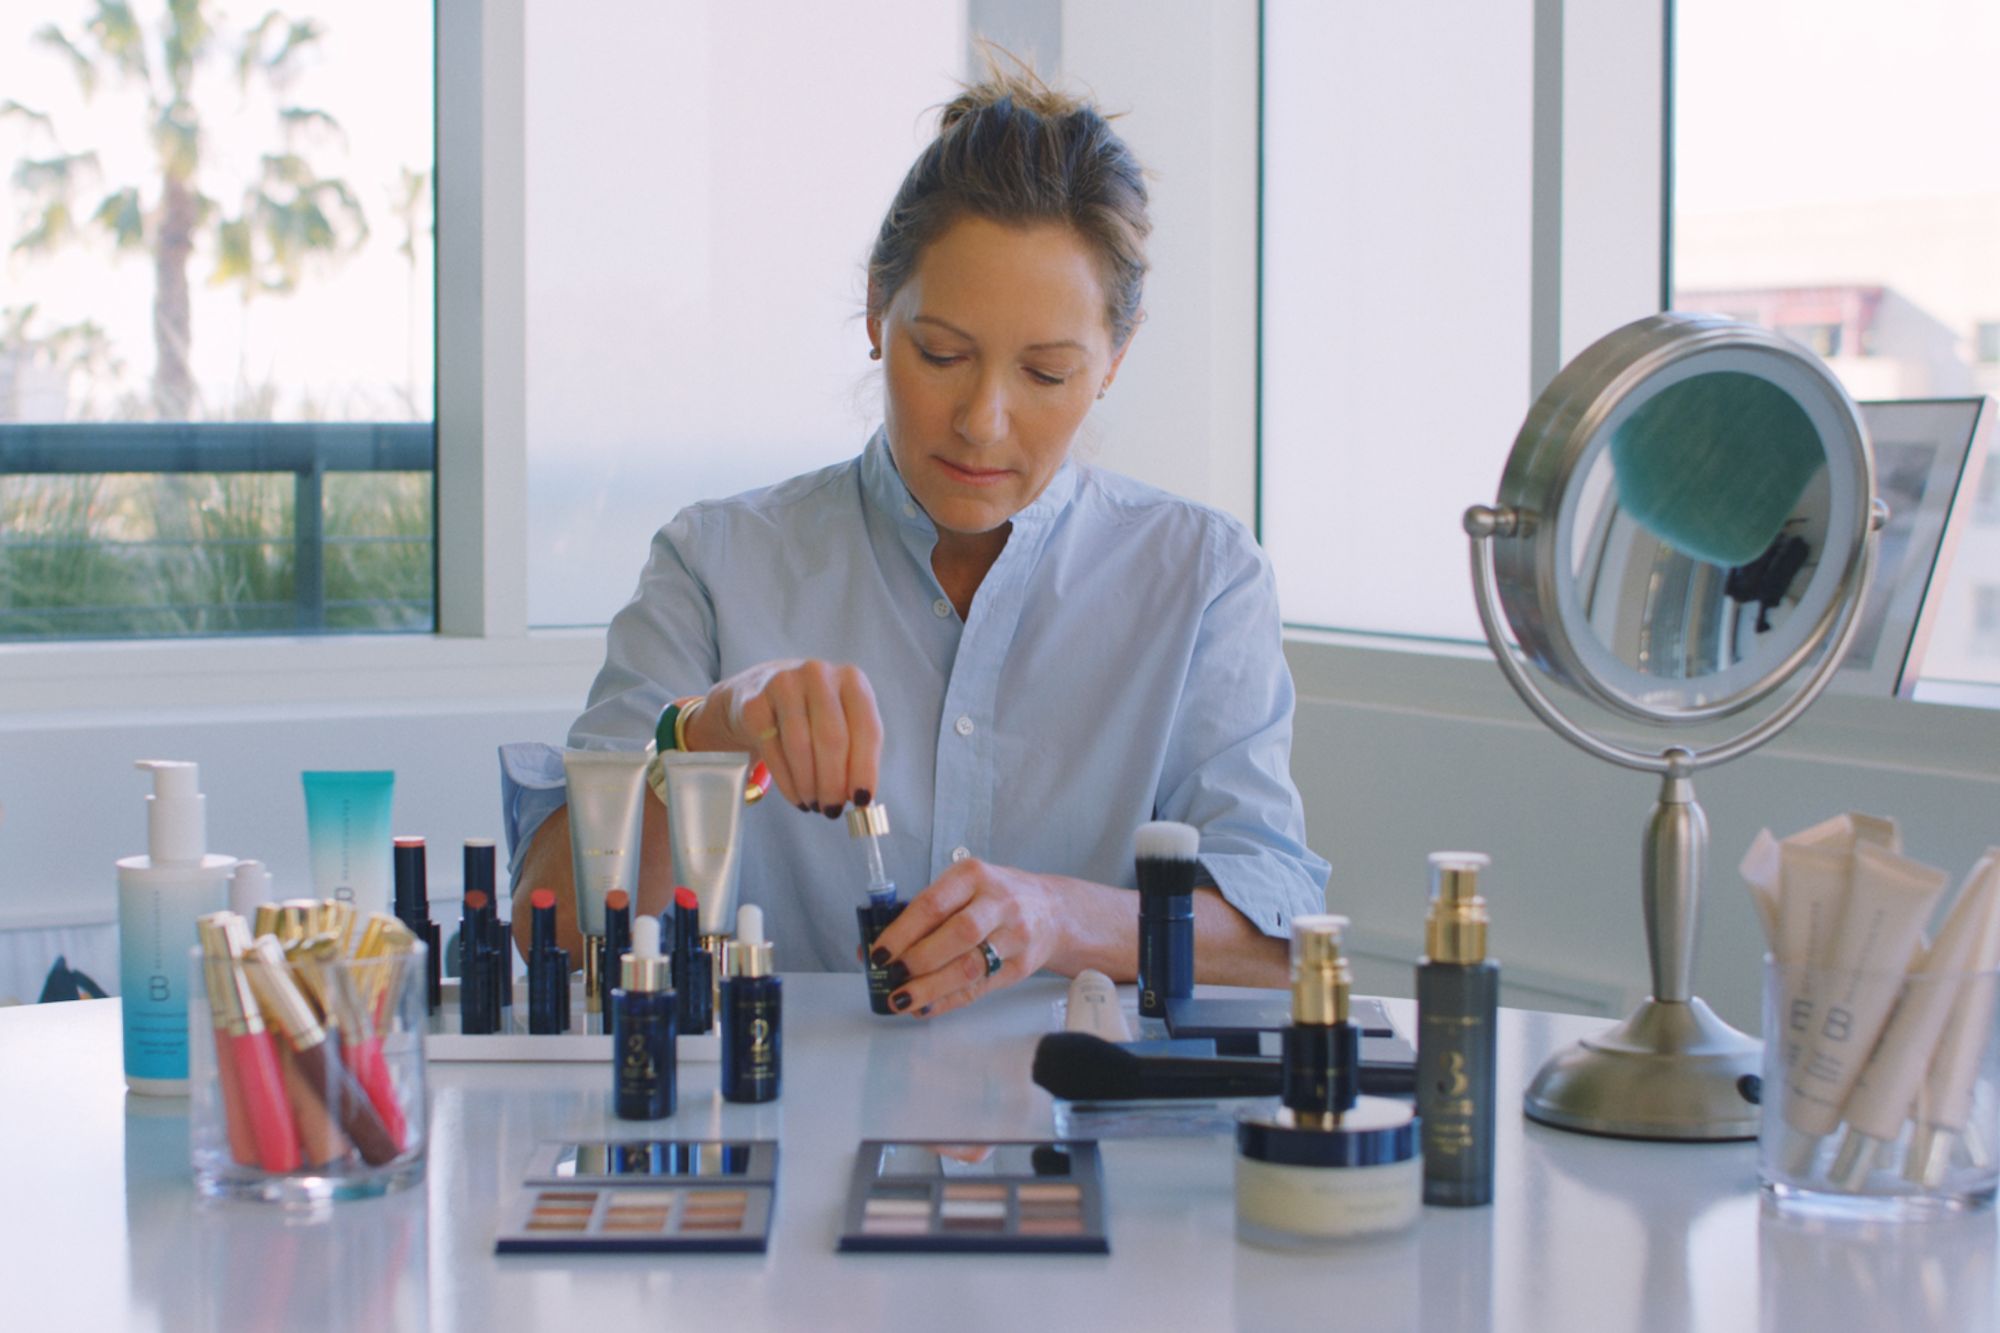 Cosmetics With a Cause: Why Gregg Renfrew Is Fighting to Reform the Beauty Industry